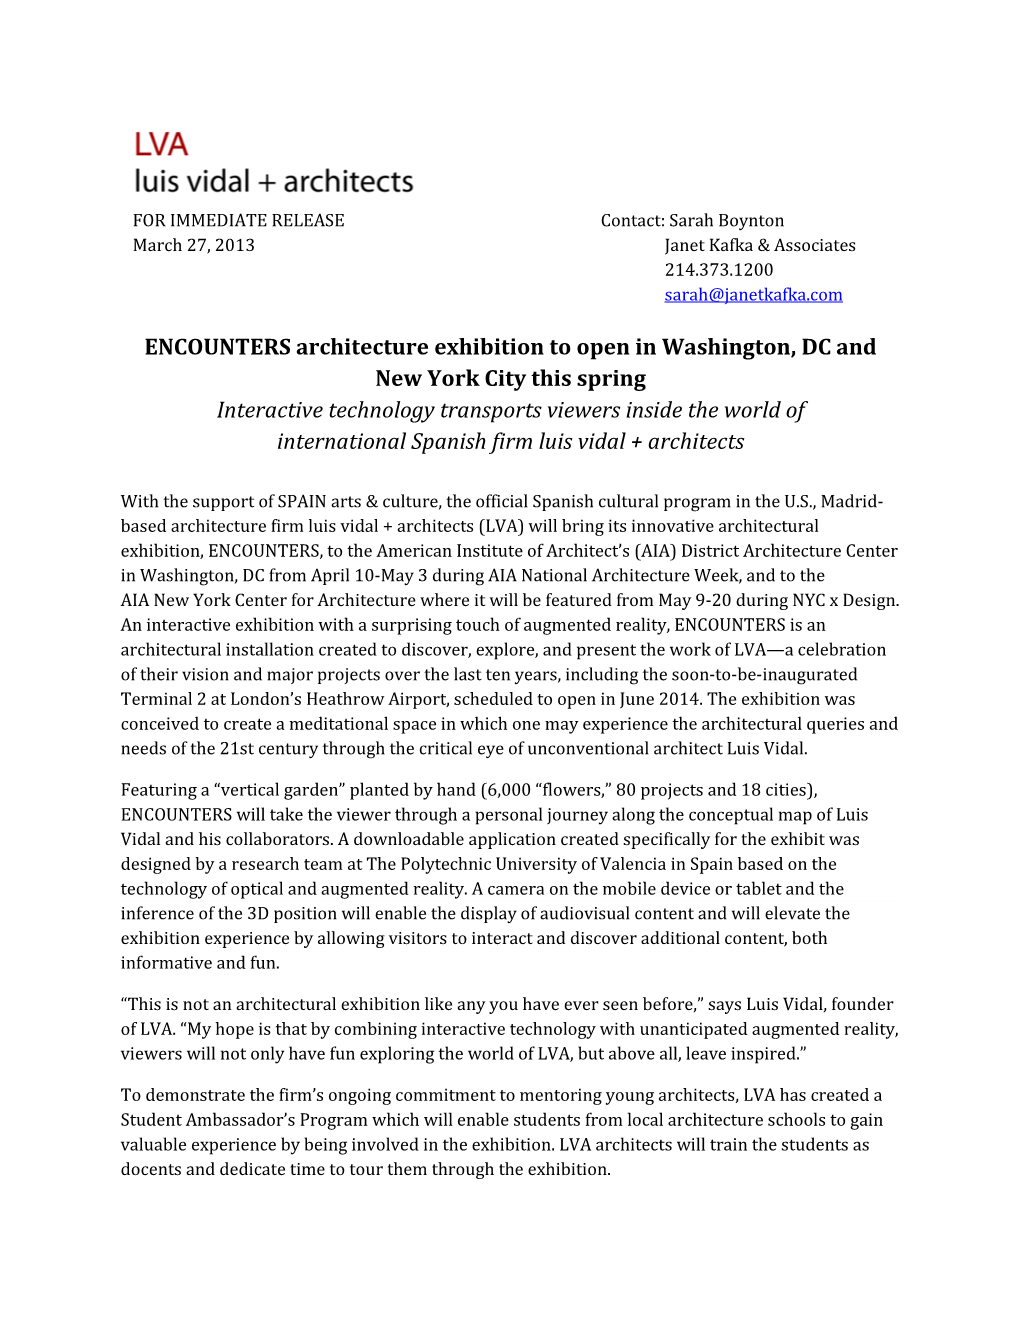 ENCOUNTERS Architecture Exhibition to Open in Washington, DC And